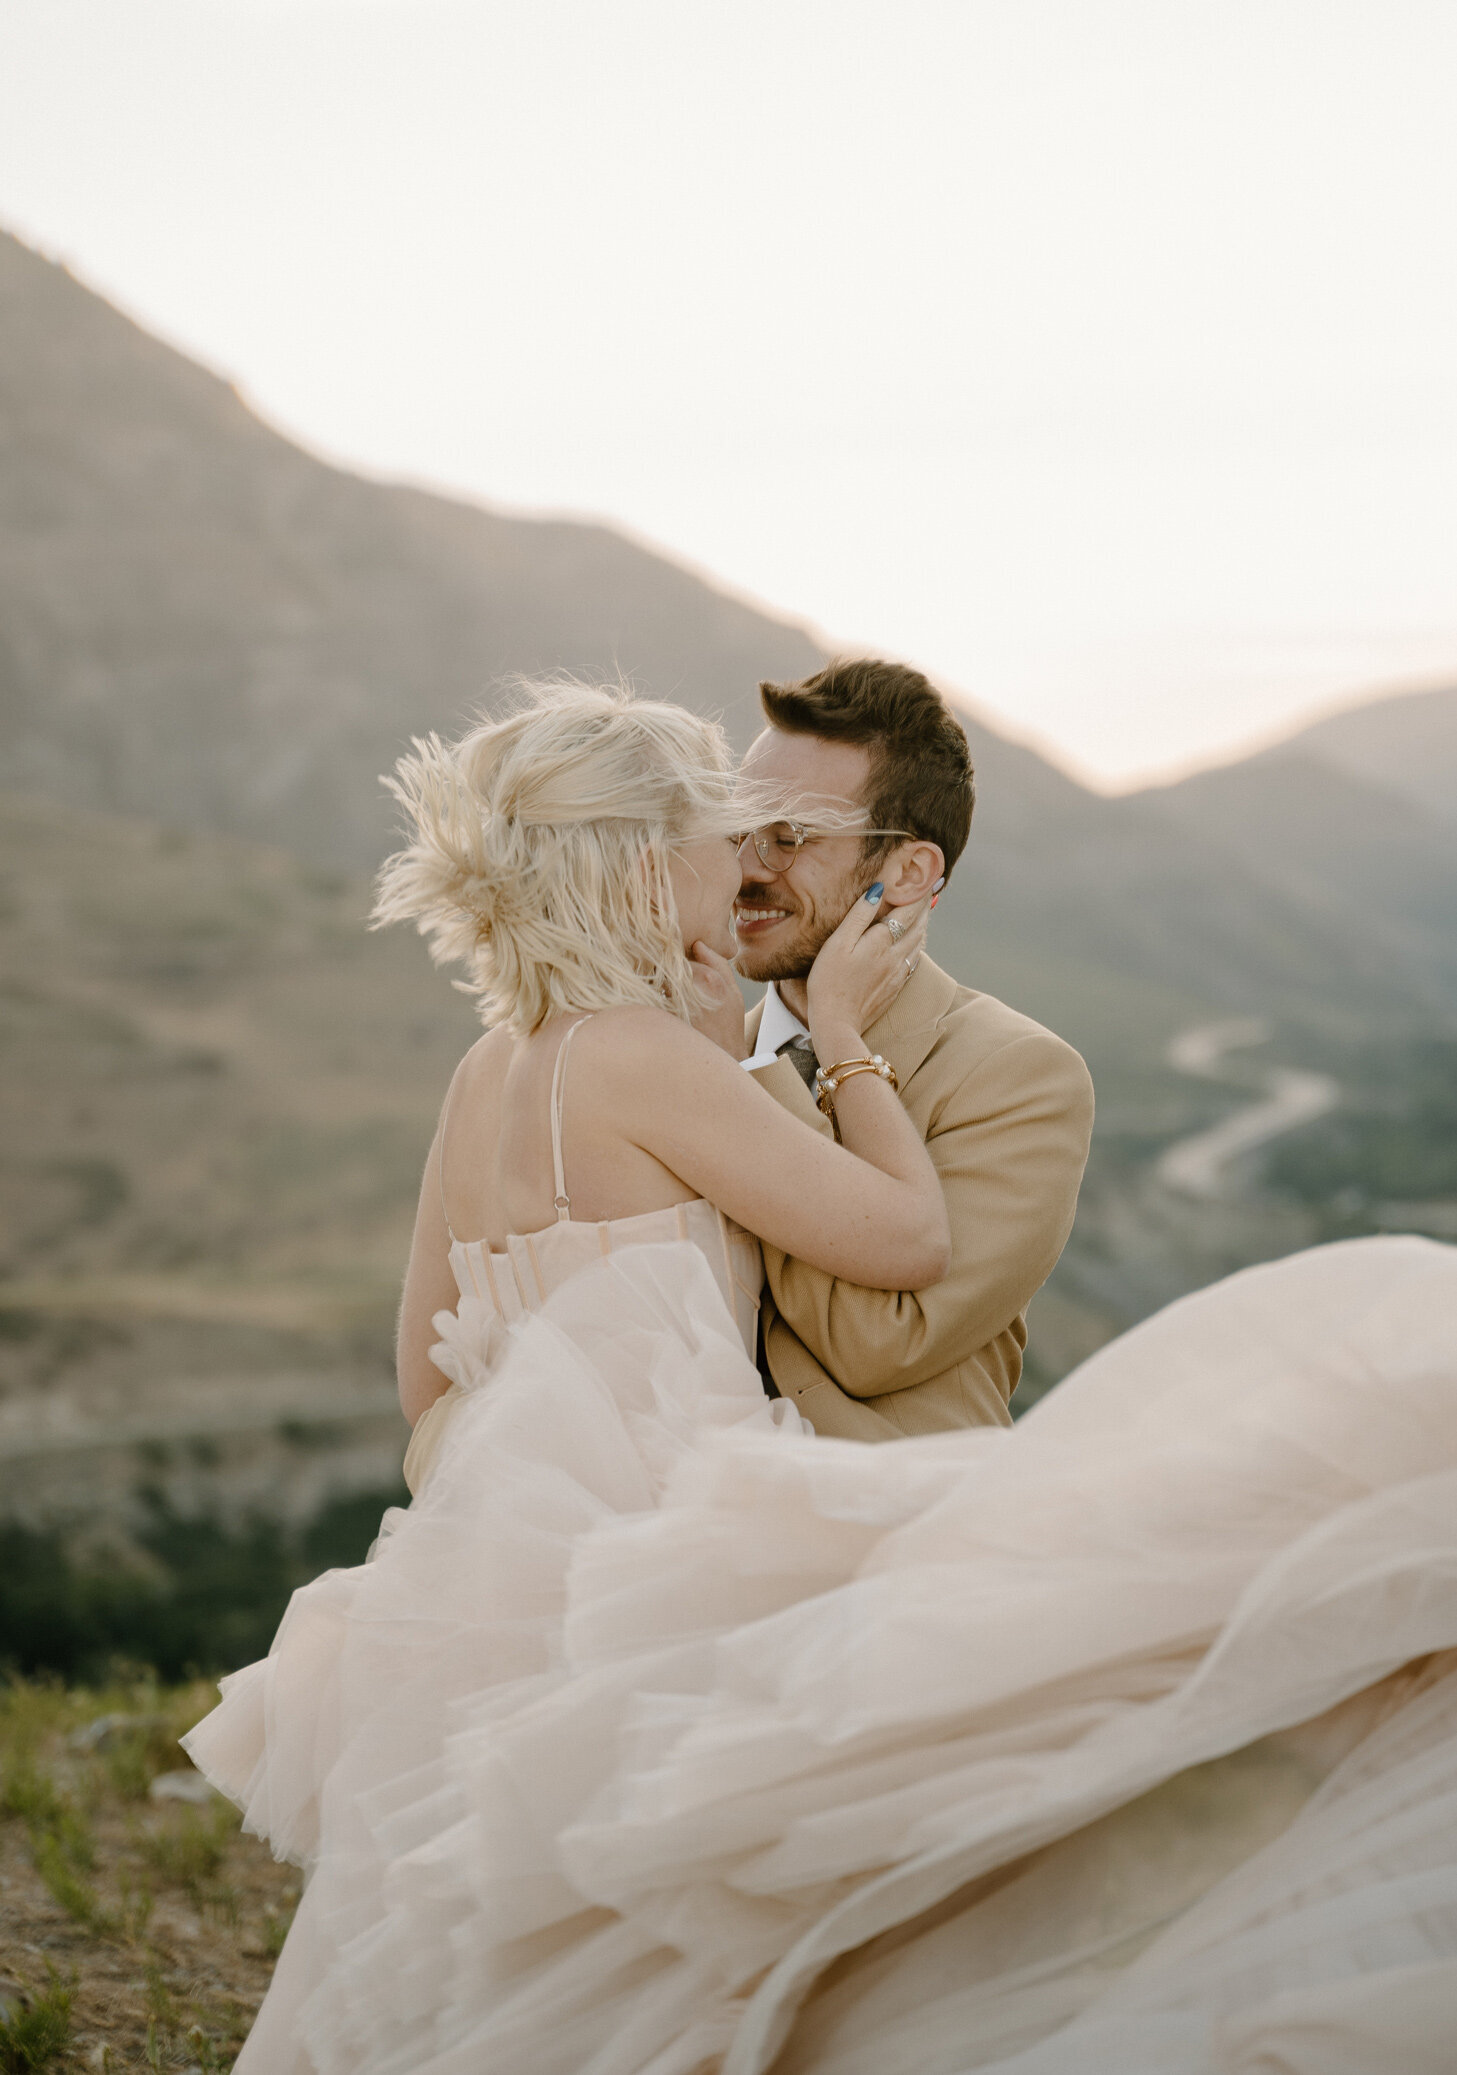 Wedding Photos from a young couple's elopement in Provo, Utah